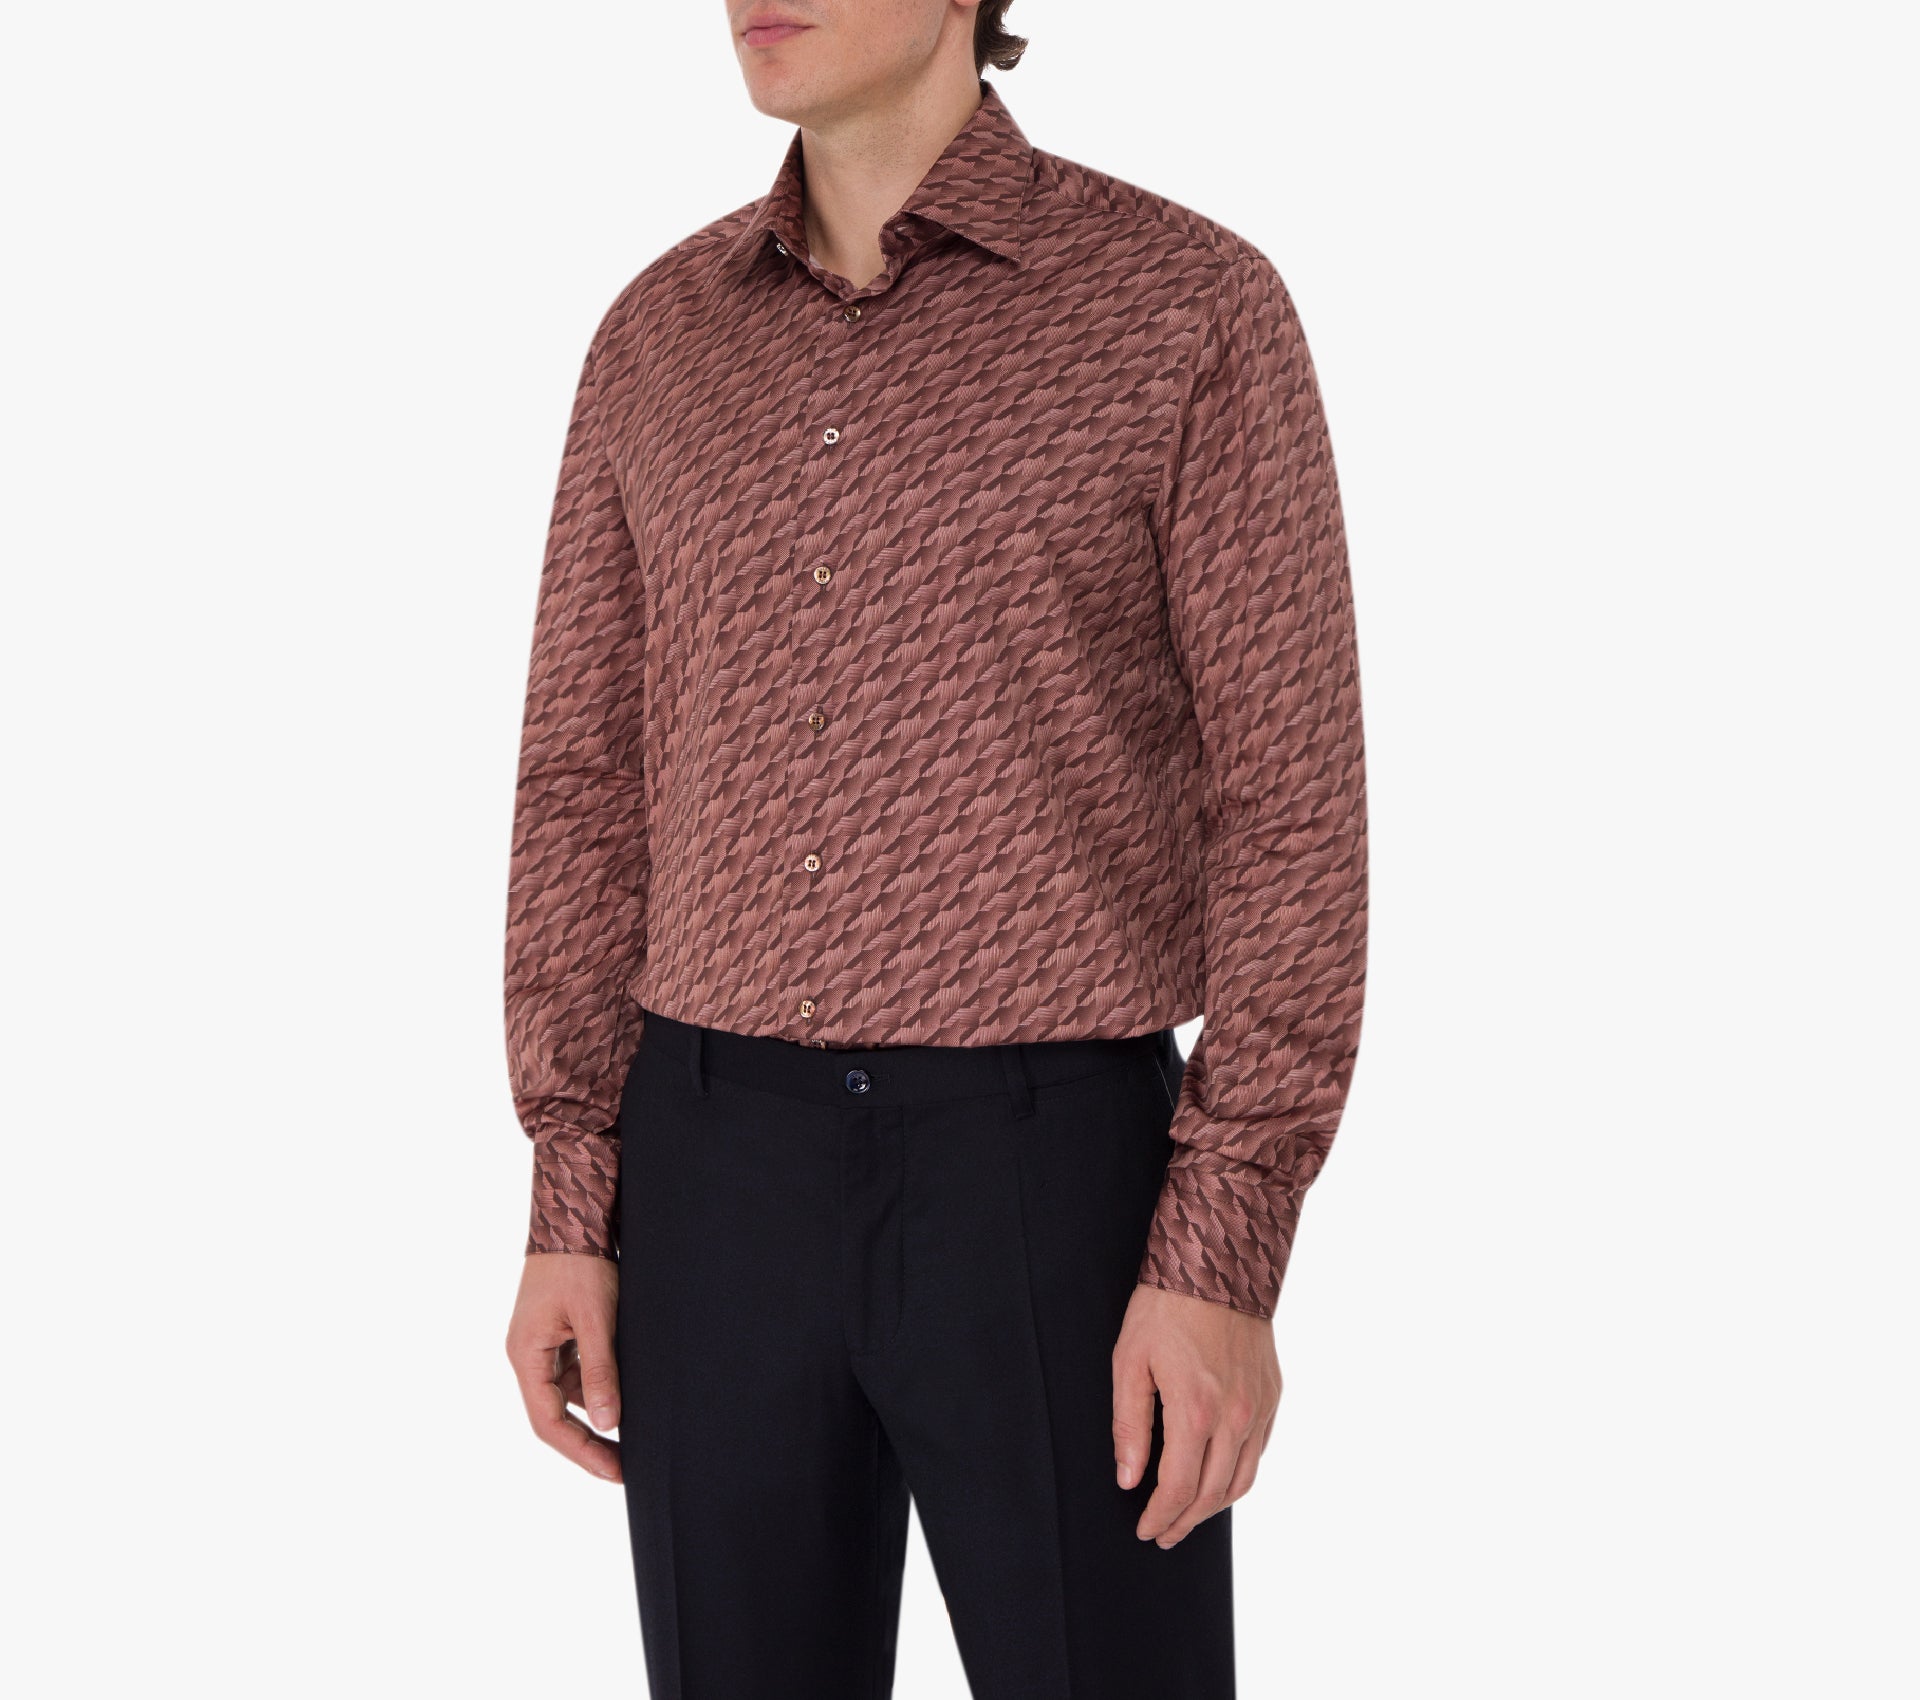 Long Sleeves Shirt with Houndstooth Pattern